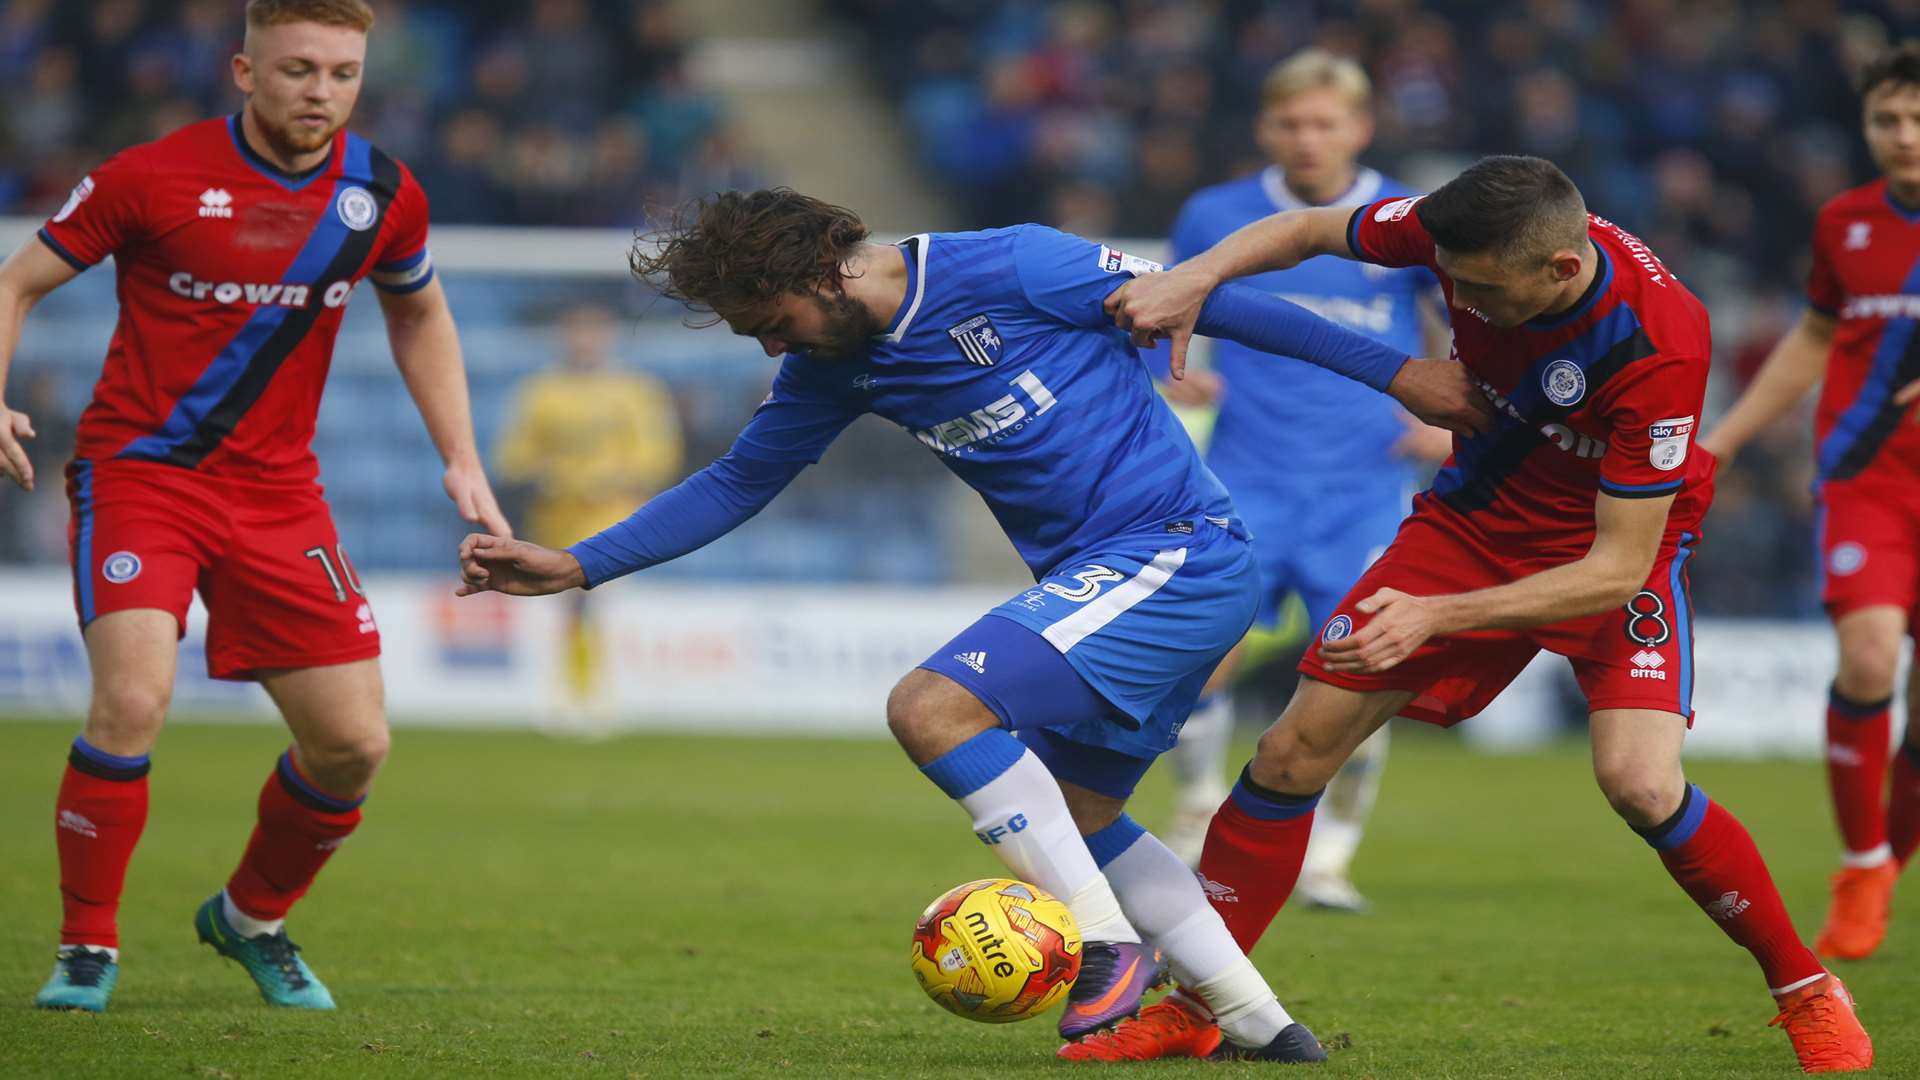 Bradley Dack digs in for Gills as they ensured they went into their 16-day break with a win Picture: Andy Jones